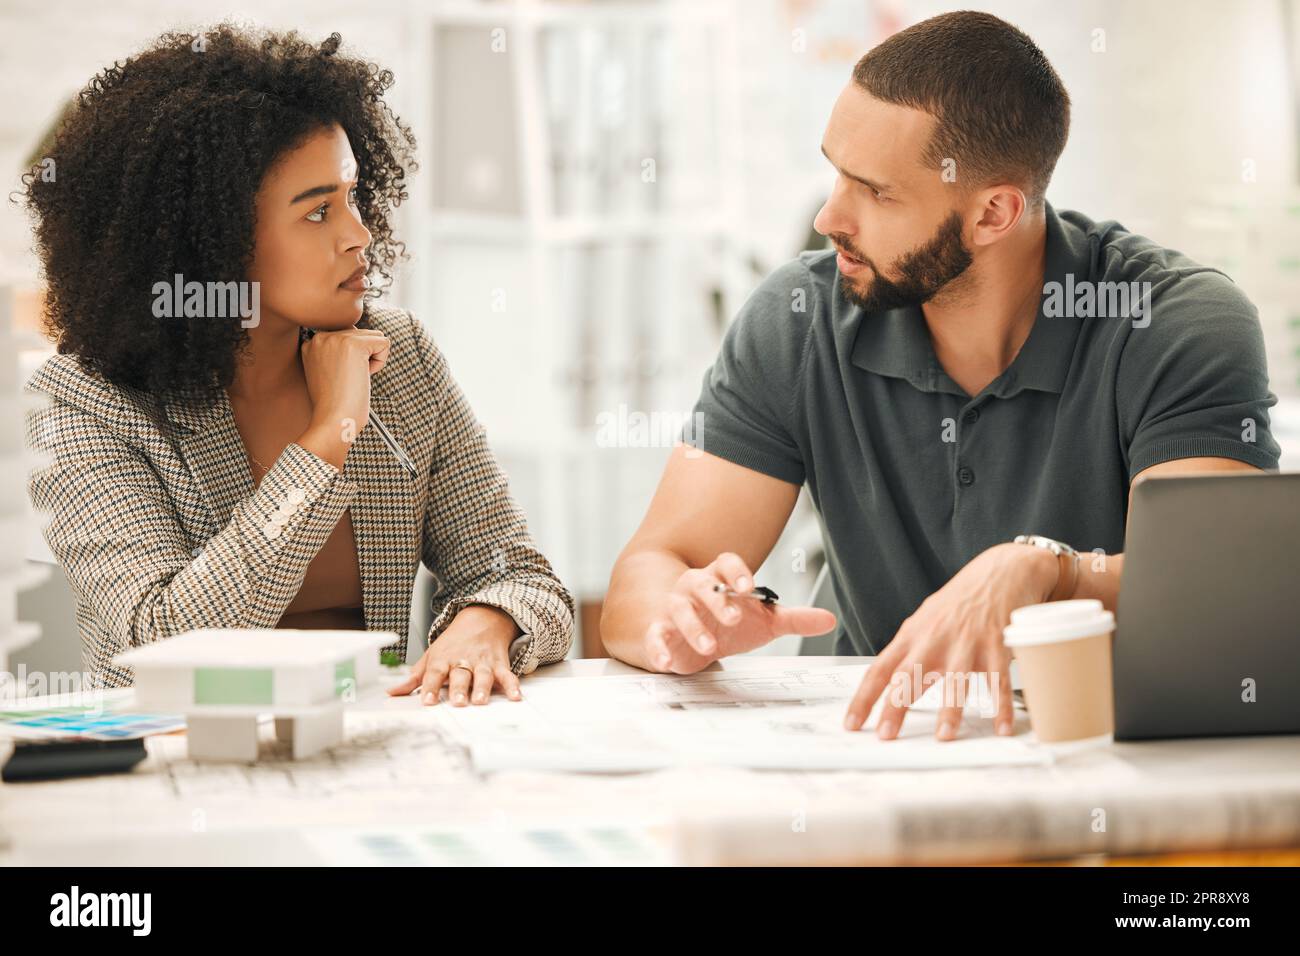 Focused colleagues working on a project together. Young architects working together in an office. Businesspeople working in a design agency. Professional creatives brainstorm and collaborate. Stock Photo